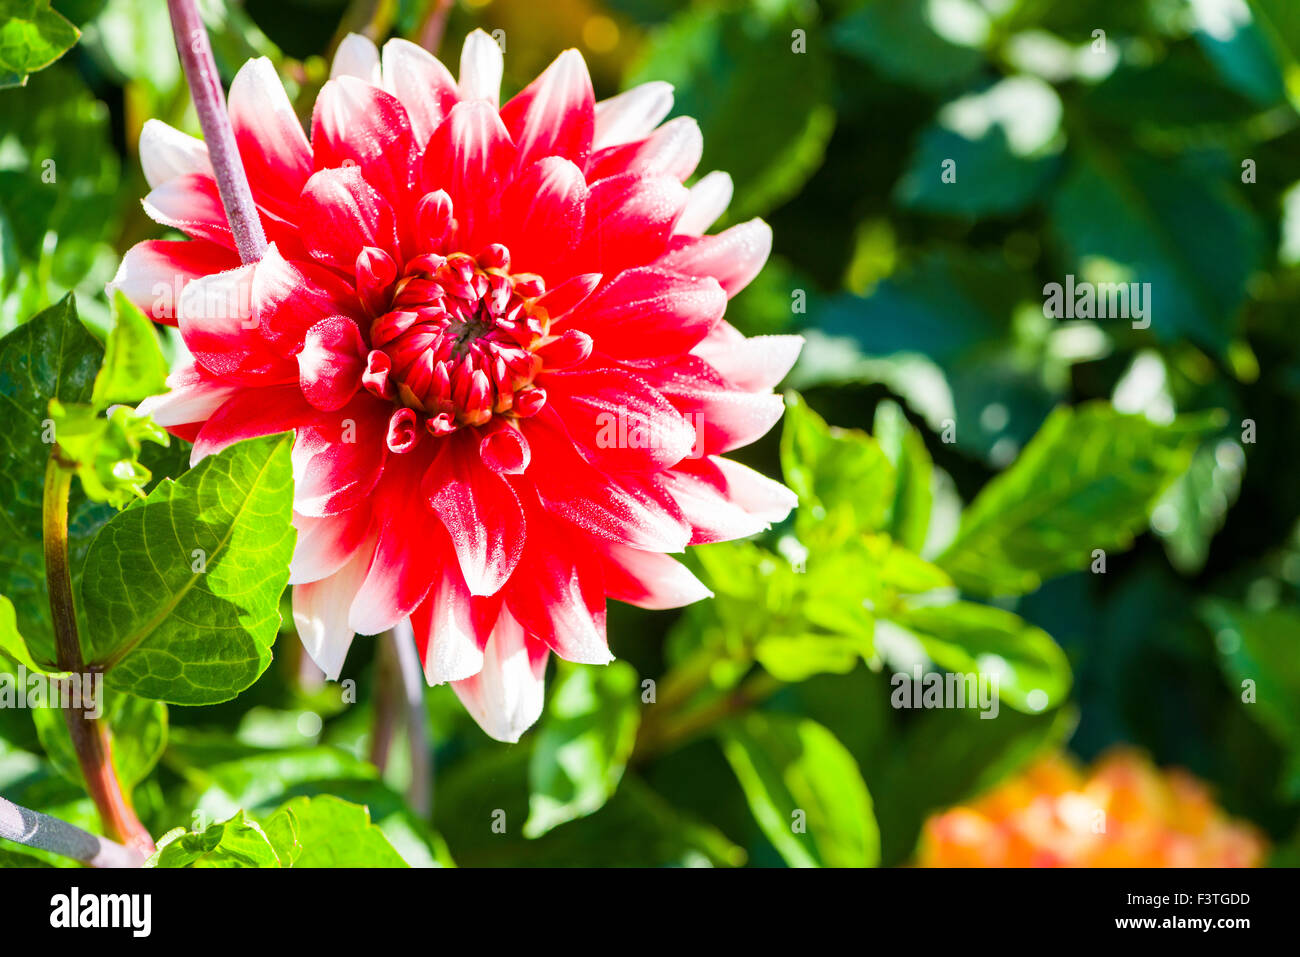 The flower in blossom of a dahlia named Ellie Stock Photo